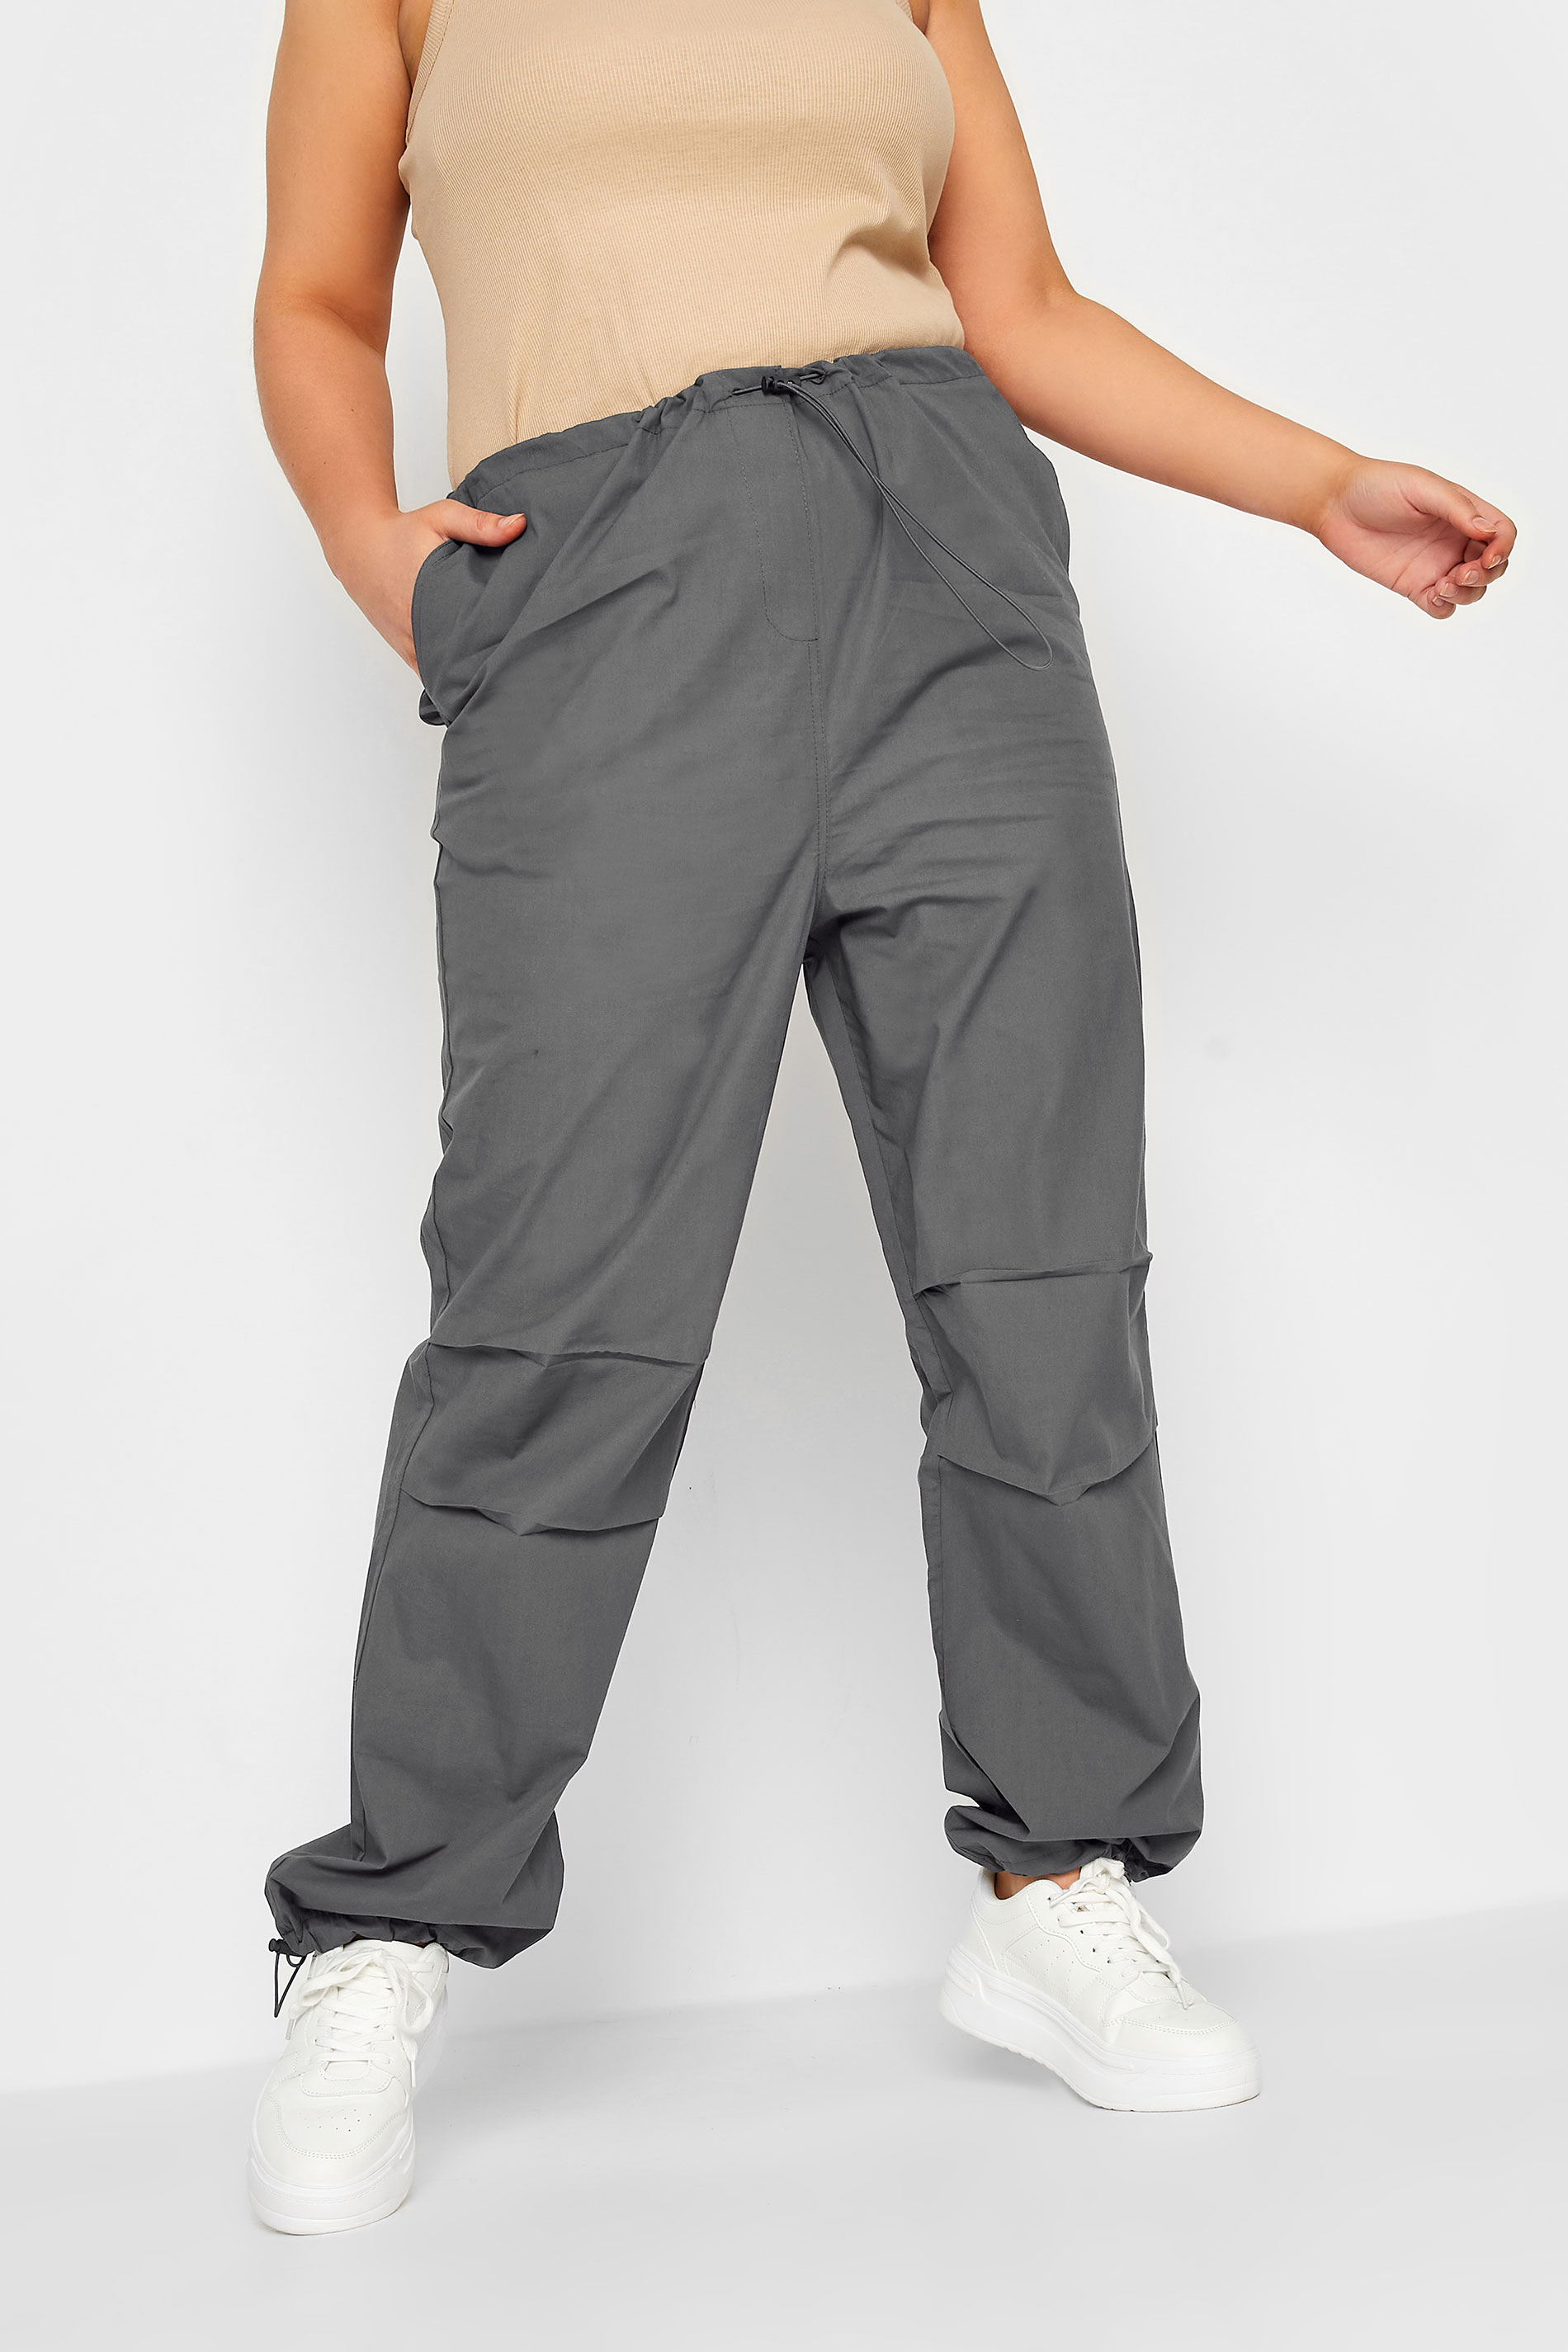 YOURS Curve Plus Size Charcoal Grey Cuffed Parachute Trousers | Yours ...